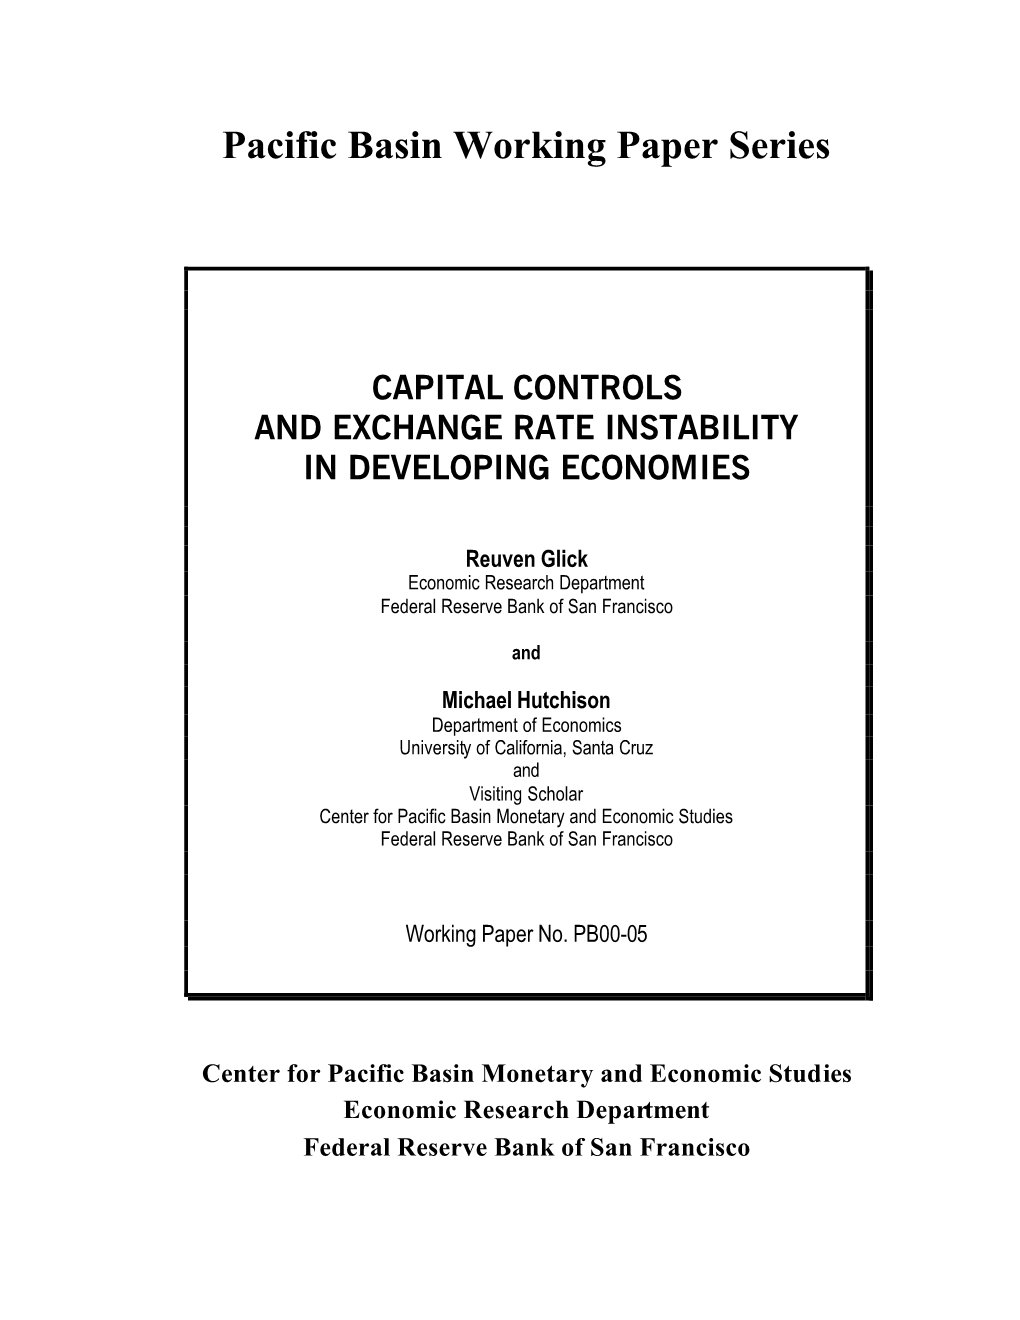 Capital Controls and Exchange Rate Instability in Developing Economies